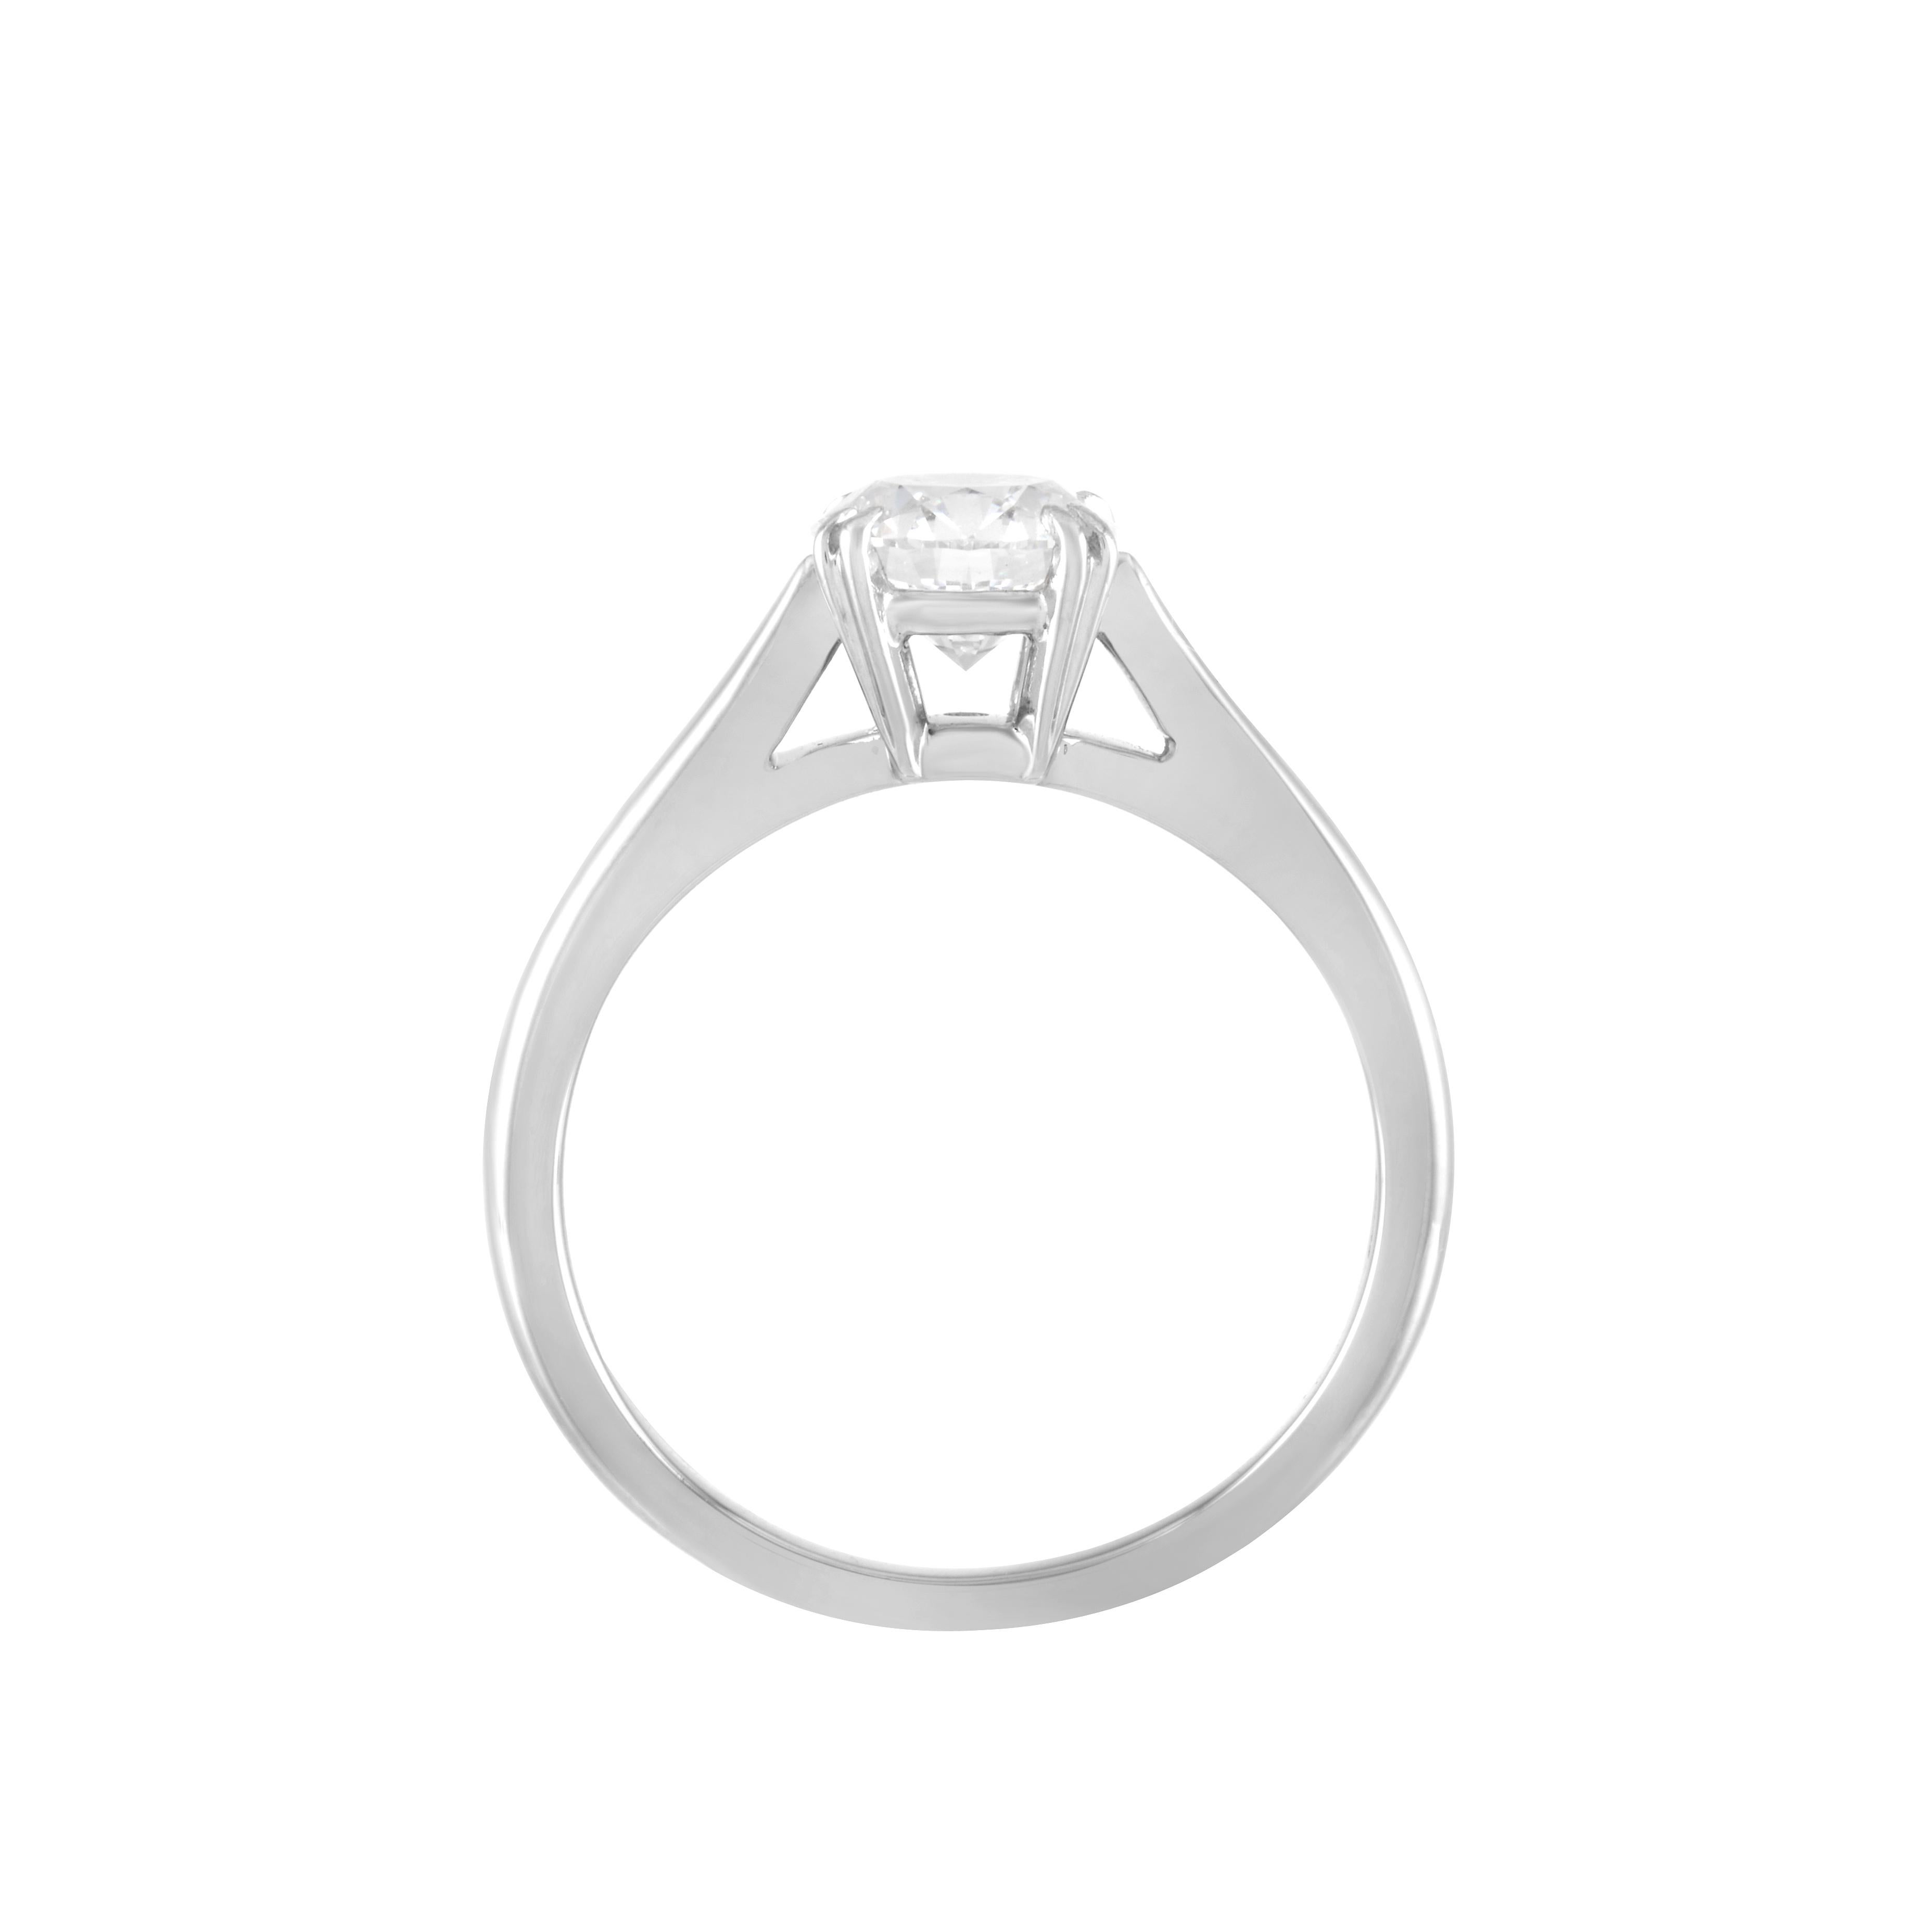 Harry Winston platinum round diamond solitaire engagement ring.

The center stone of this ring is a 0.71 carat round diamond with E color and VVS2 clarity accompanied by a GIA report in a Harry Winston folder.  The cut grade, polish and symmetry of